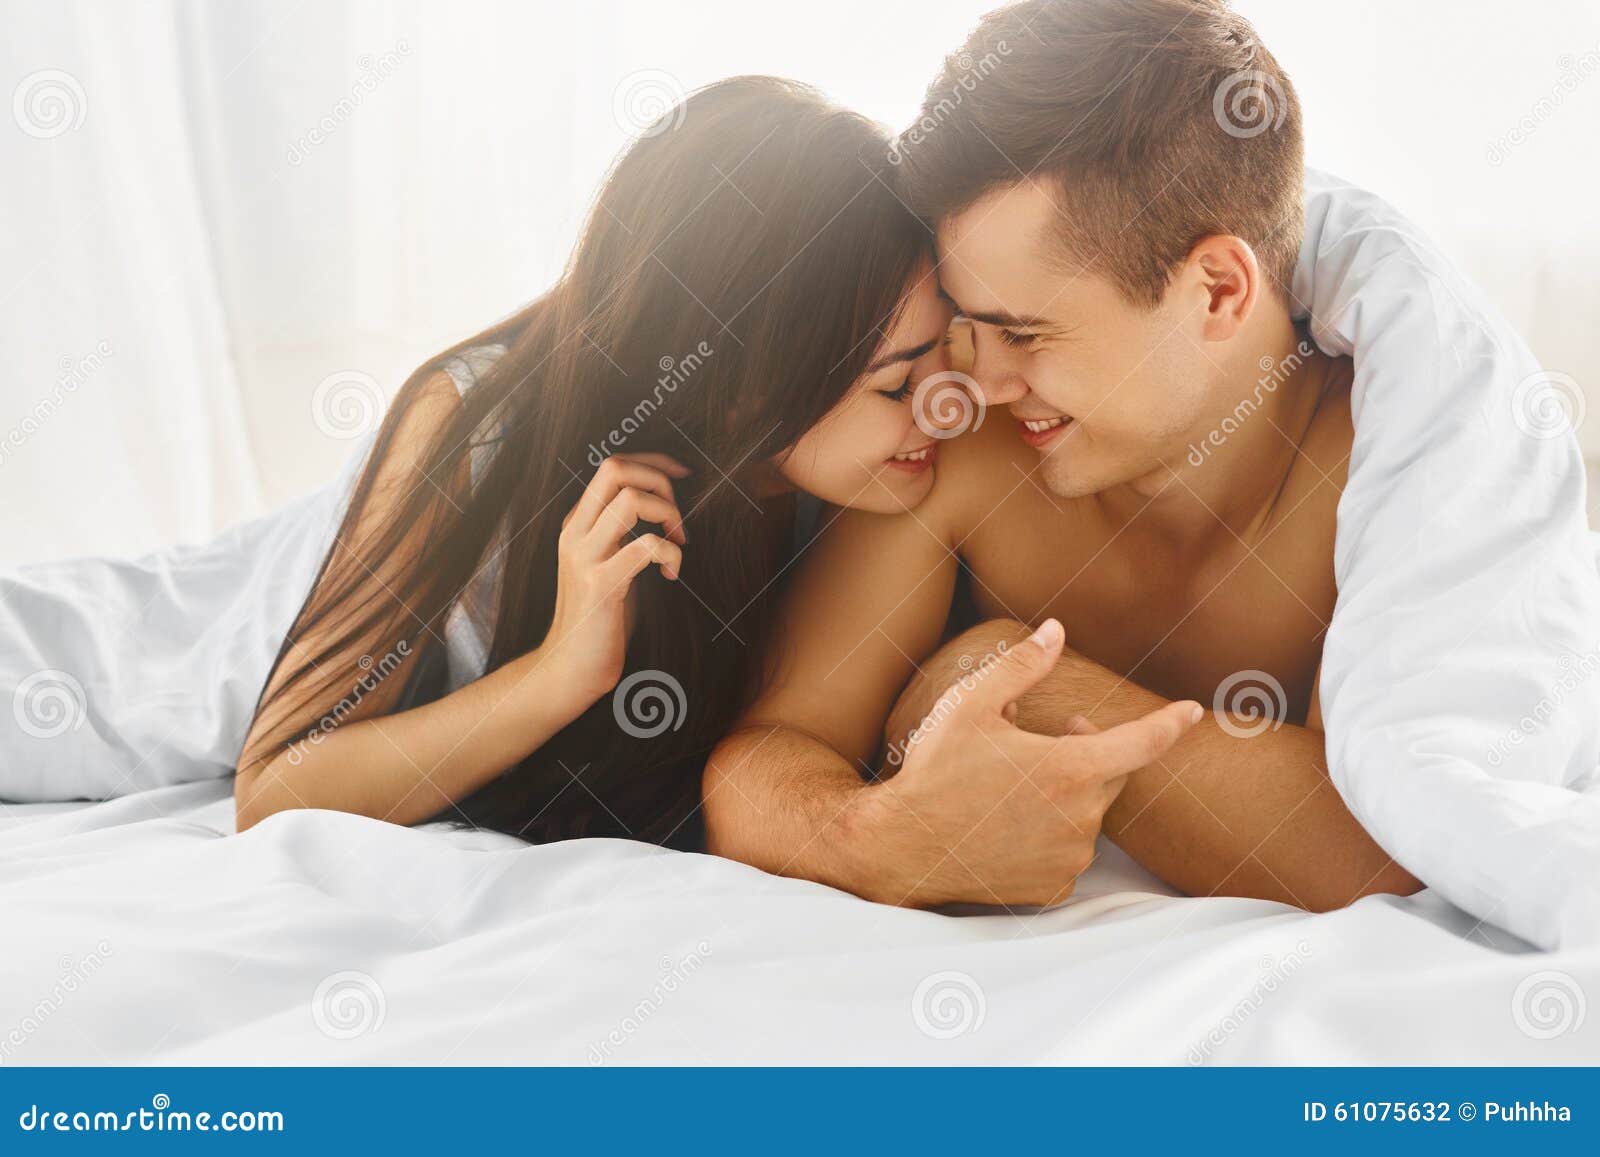 Portrait Of Man And Woman In Bed Stock Photo Image Of Lovers